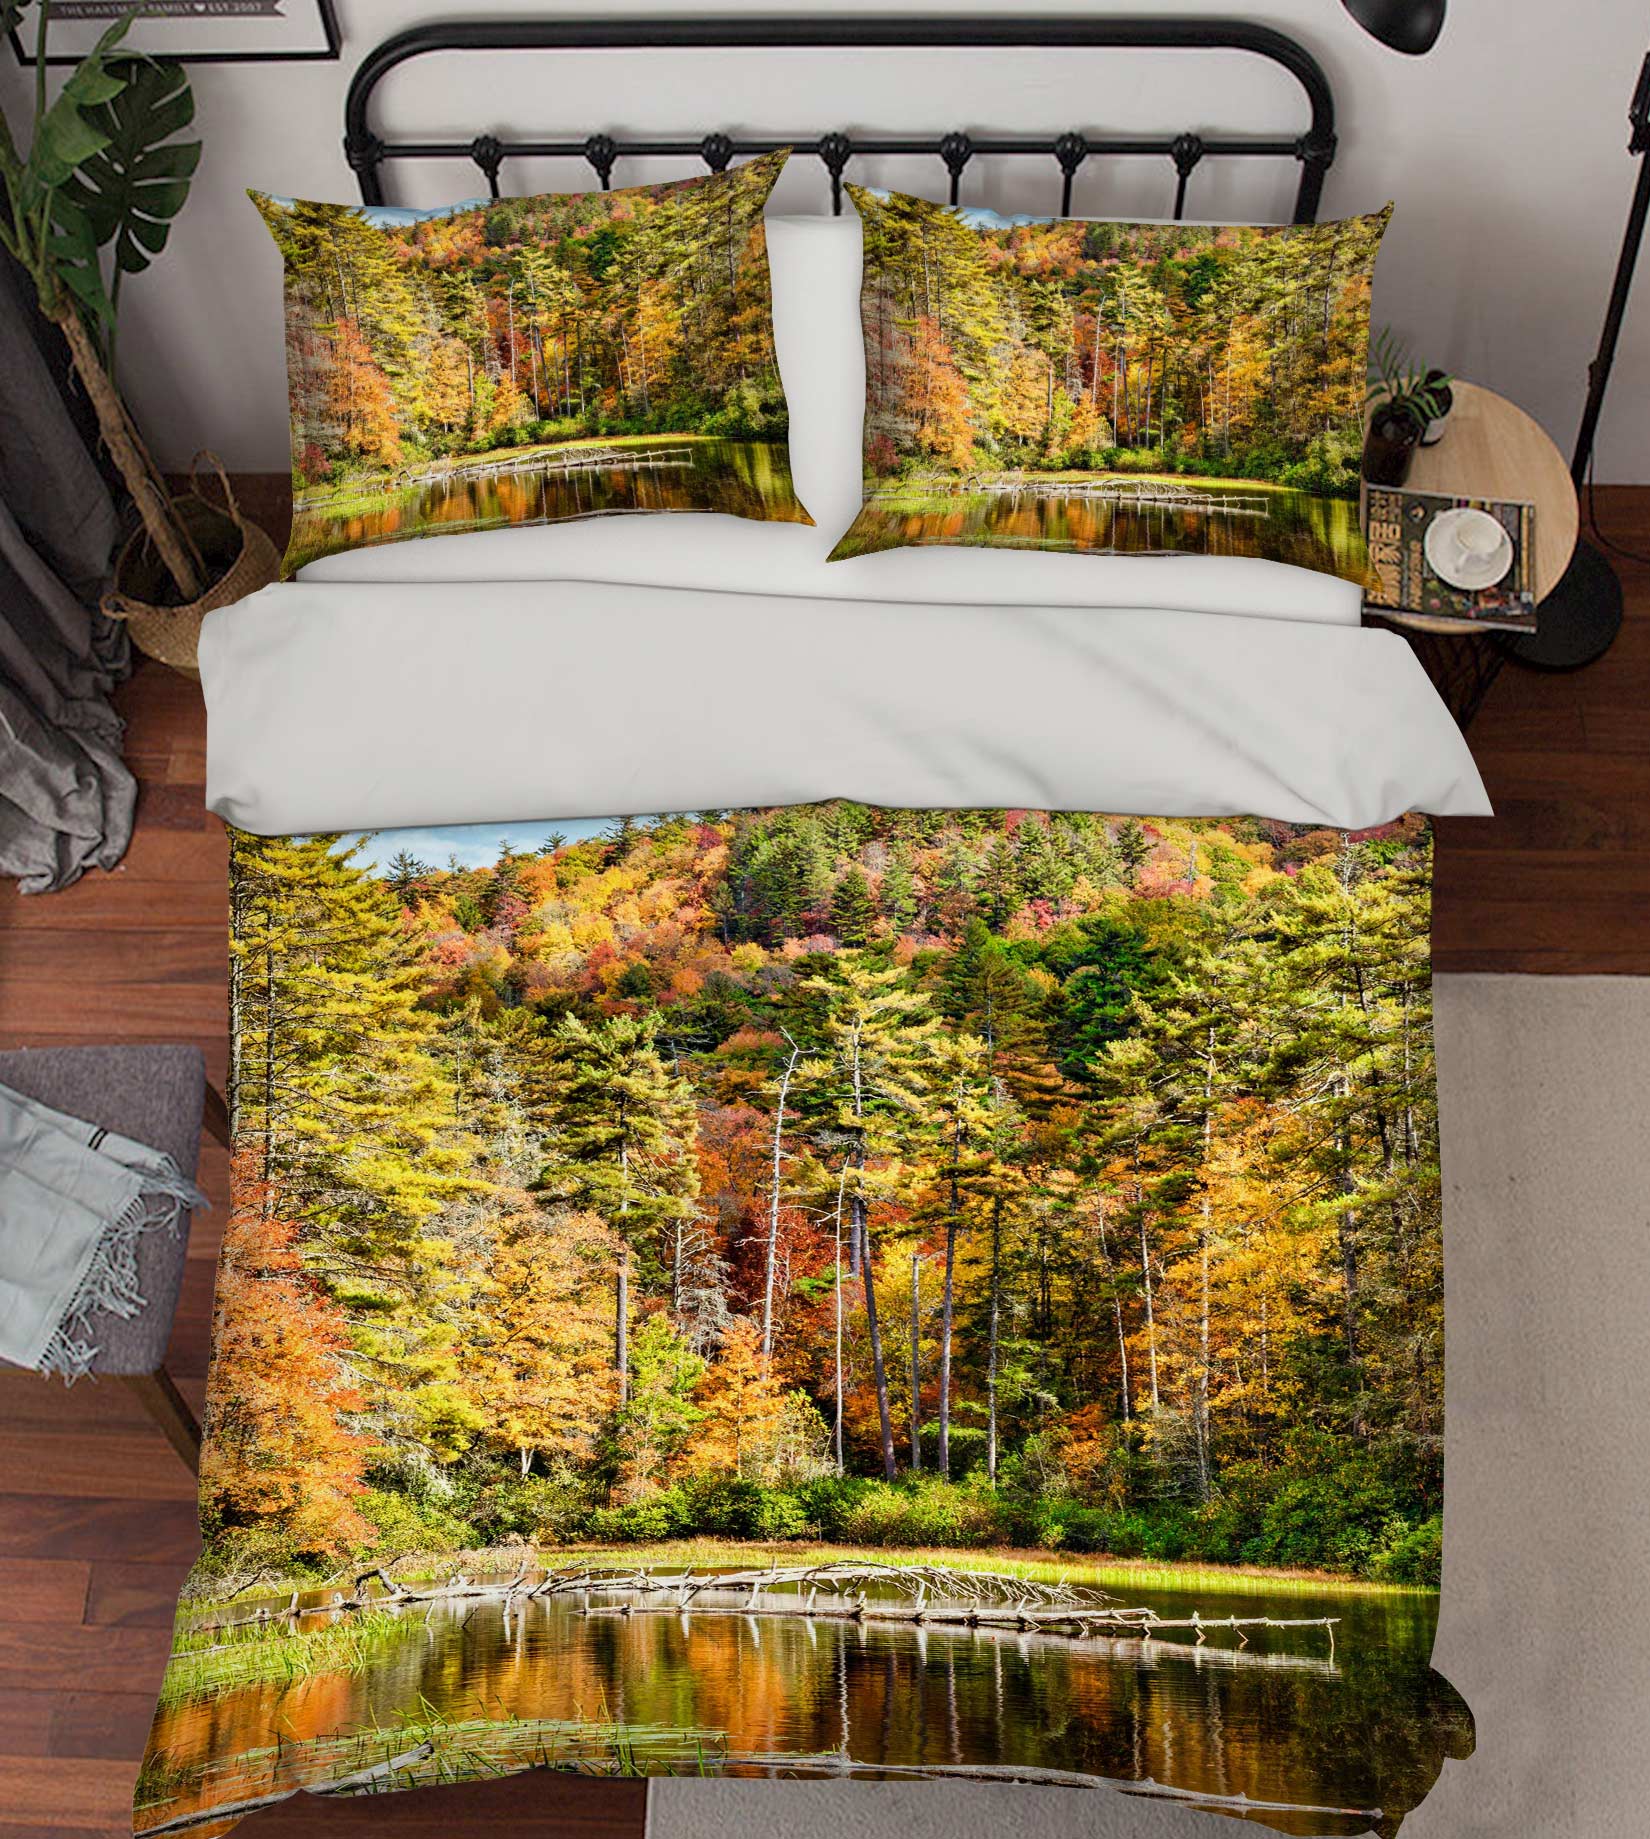 3D Forest Water Surface 8564 Beth Sheridan Bedding Bed Pillowcases Quilt